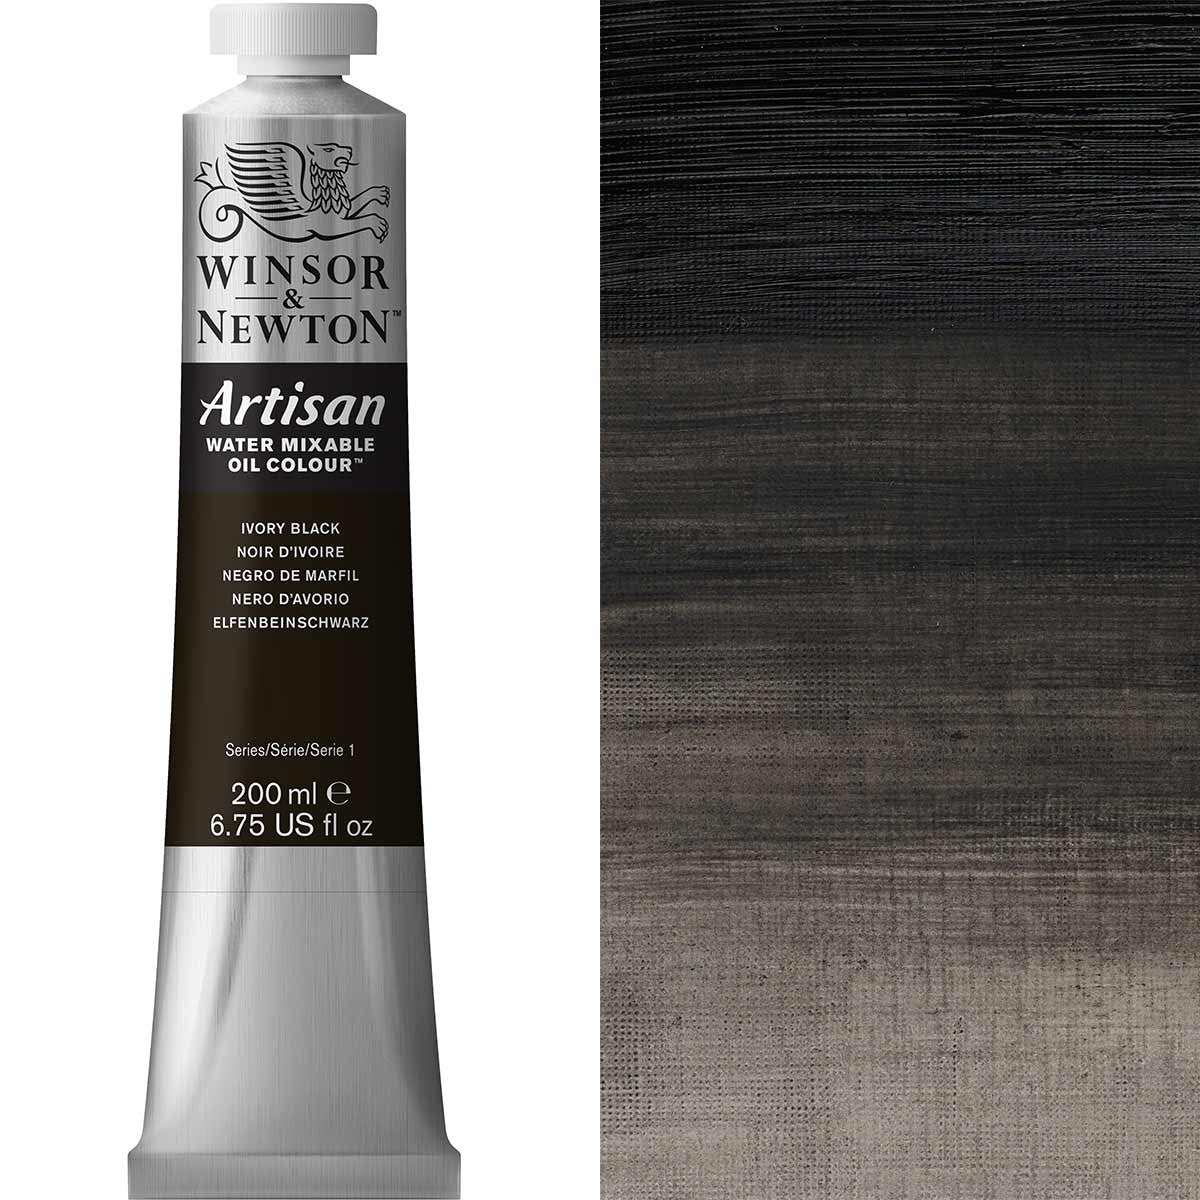 Winsor and Newton - Artisan Oil Colour Watermixable - 200ml - Ivory Black